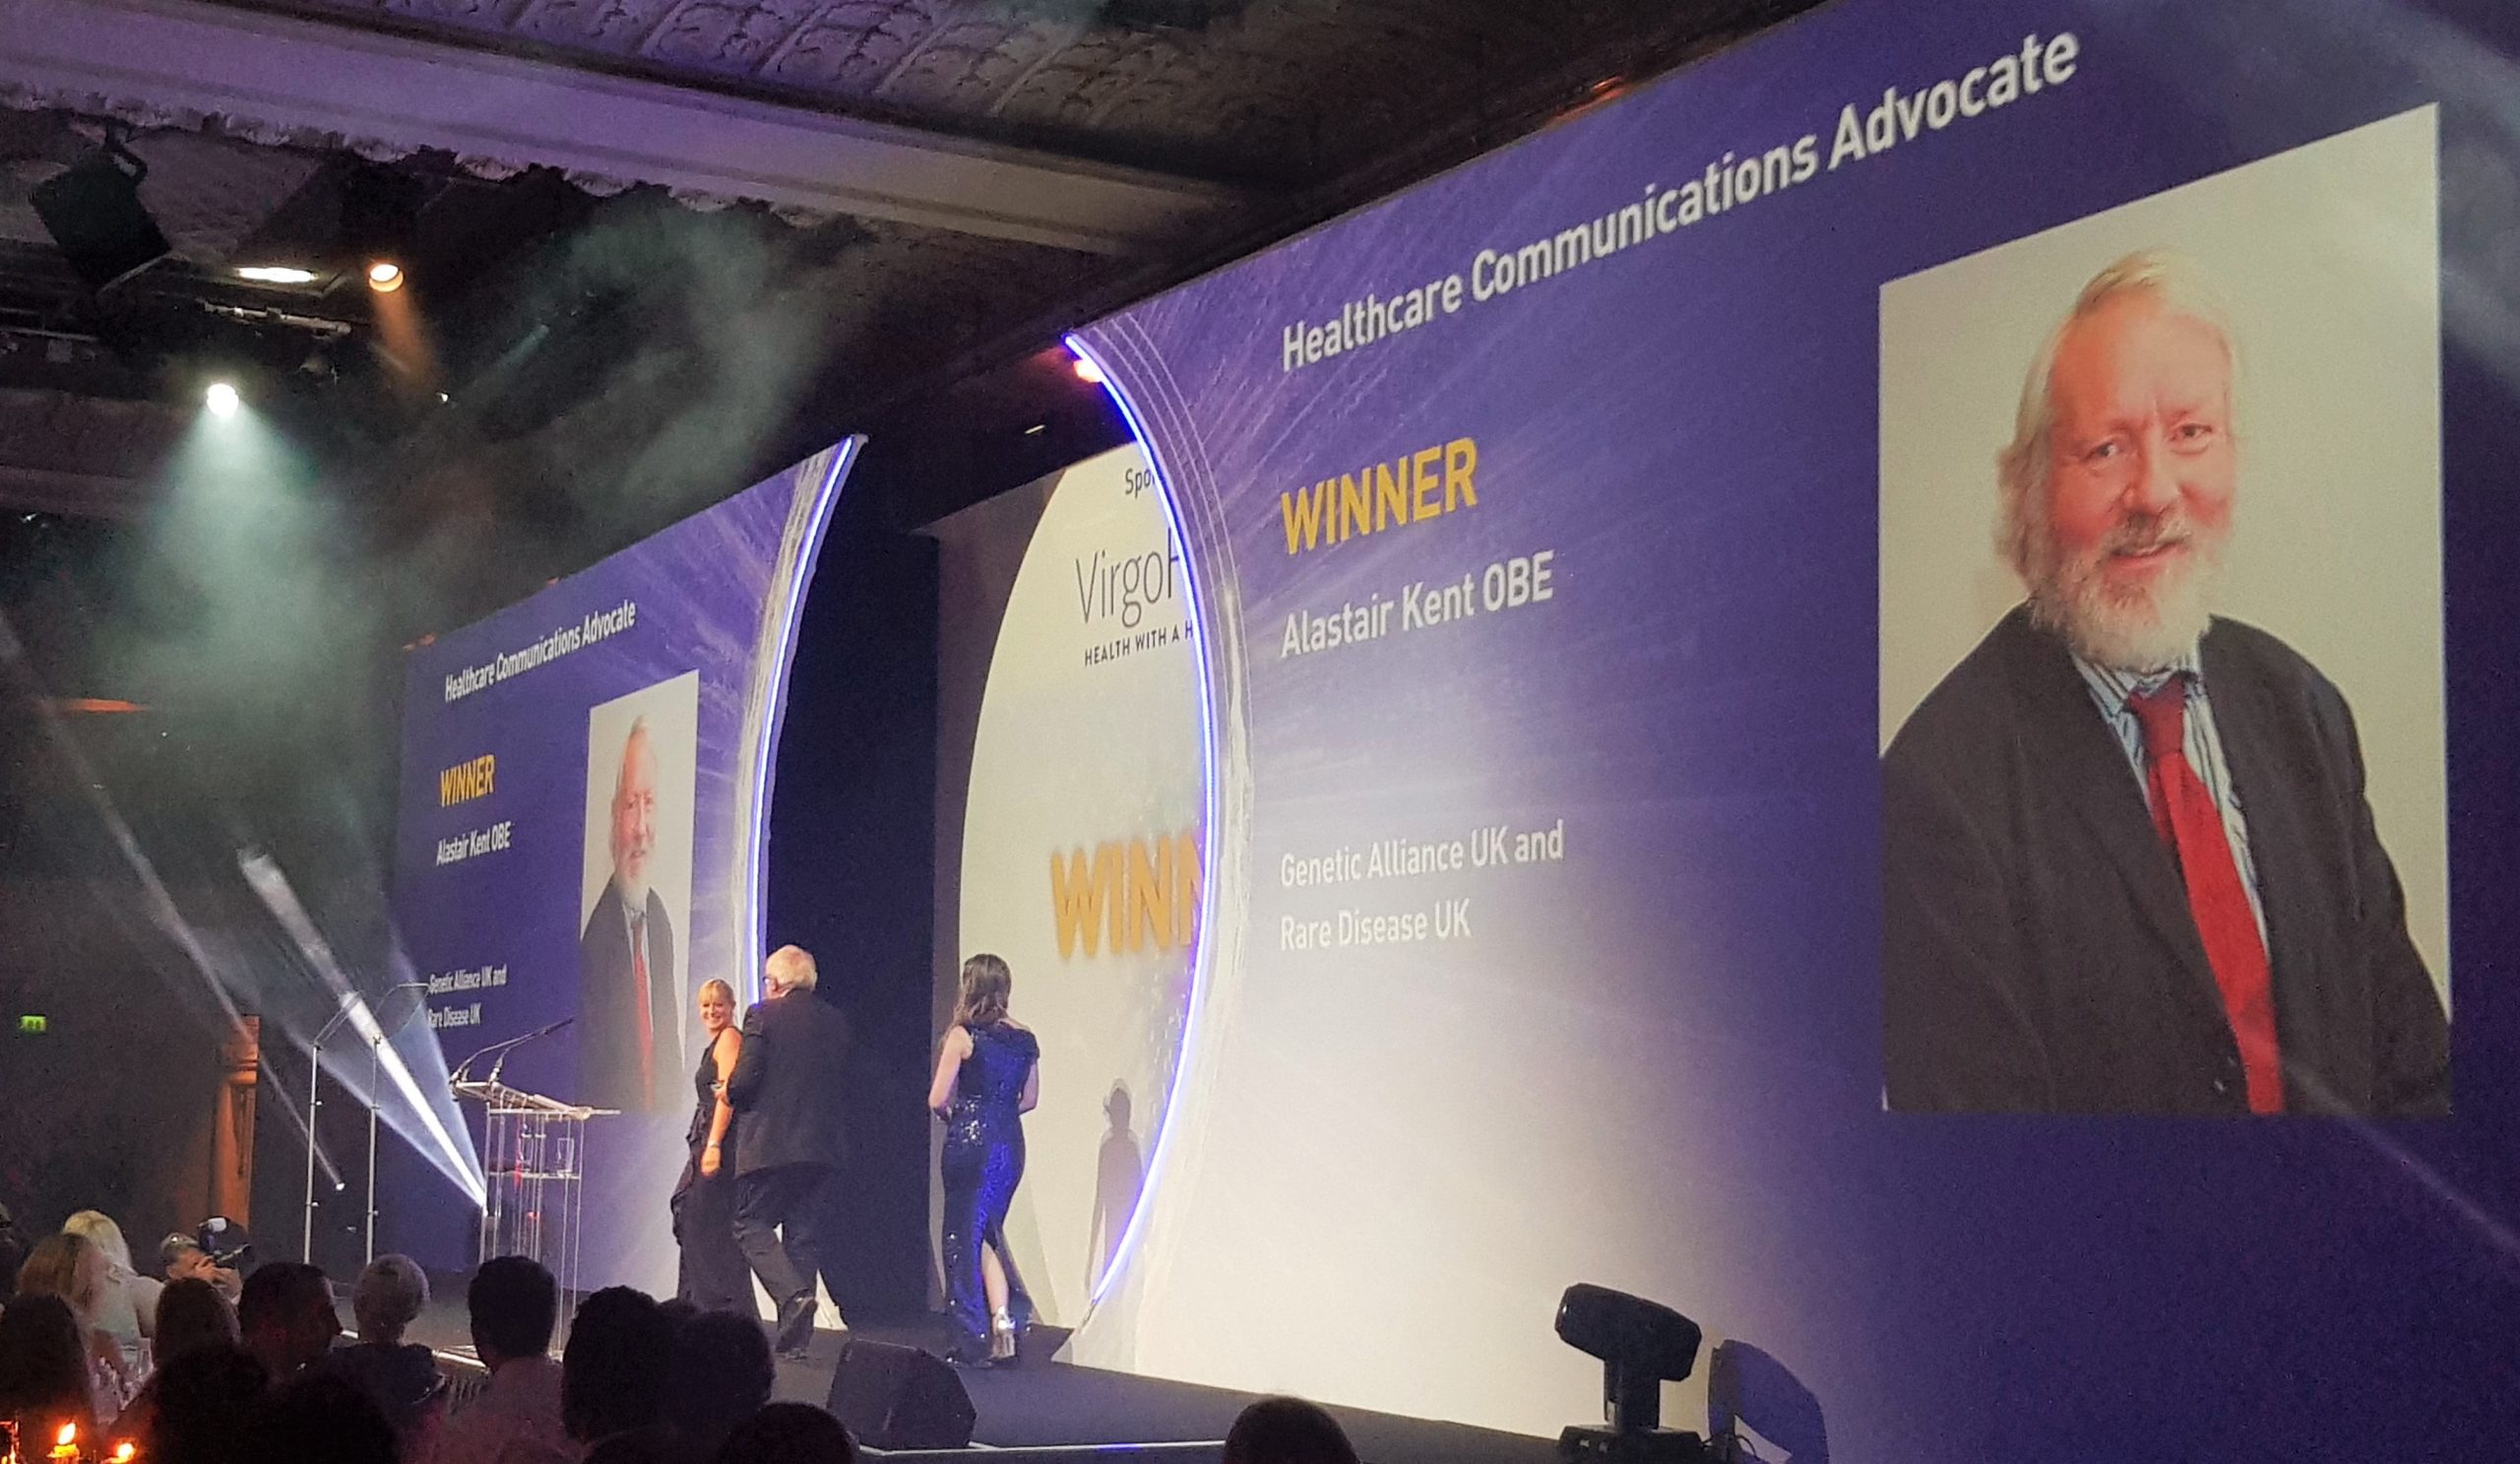 A Spotlight on Healthcare Communications Advocacy by Alastair Kent